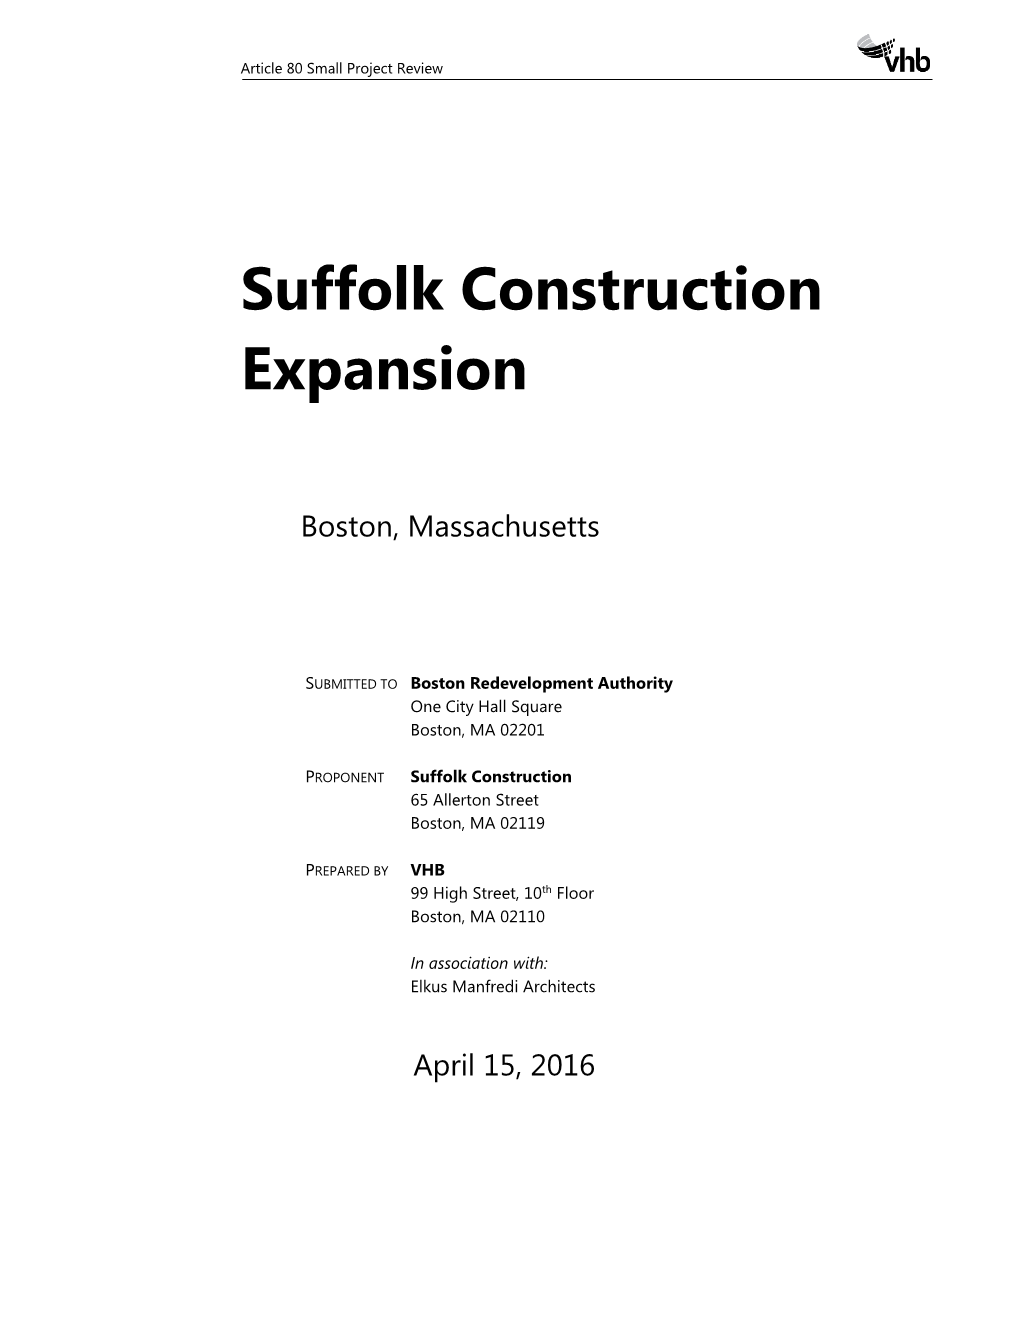 Suffolk Construction Expansion